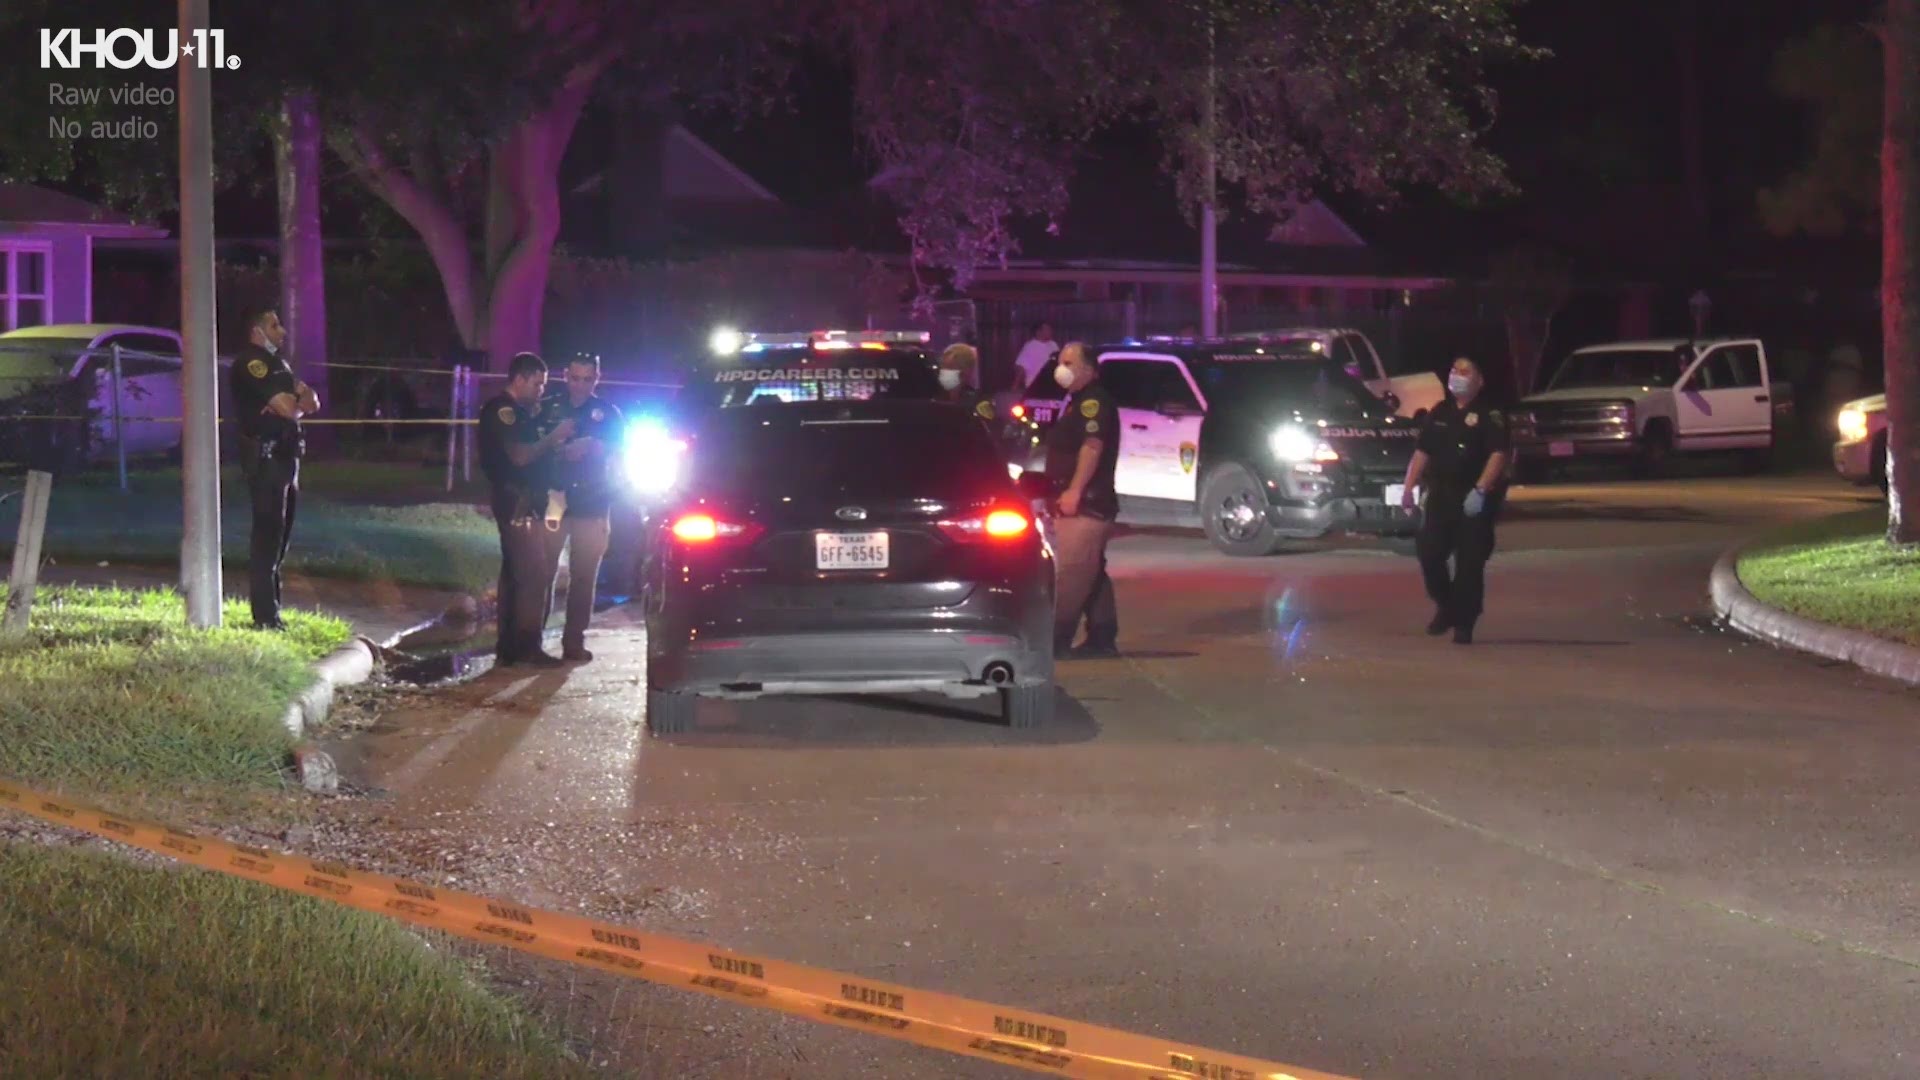 Houston police said at least three people were killed in three separate shootings within an hour in southwest Houston on May 6, 2020.